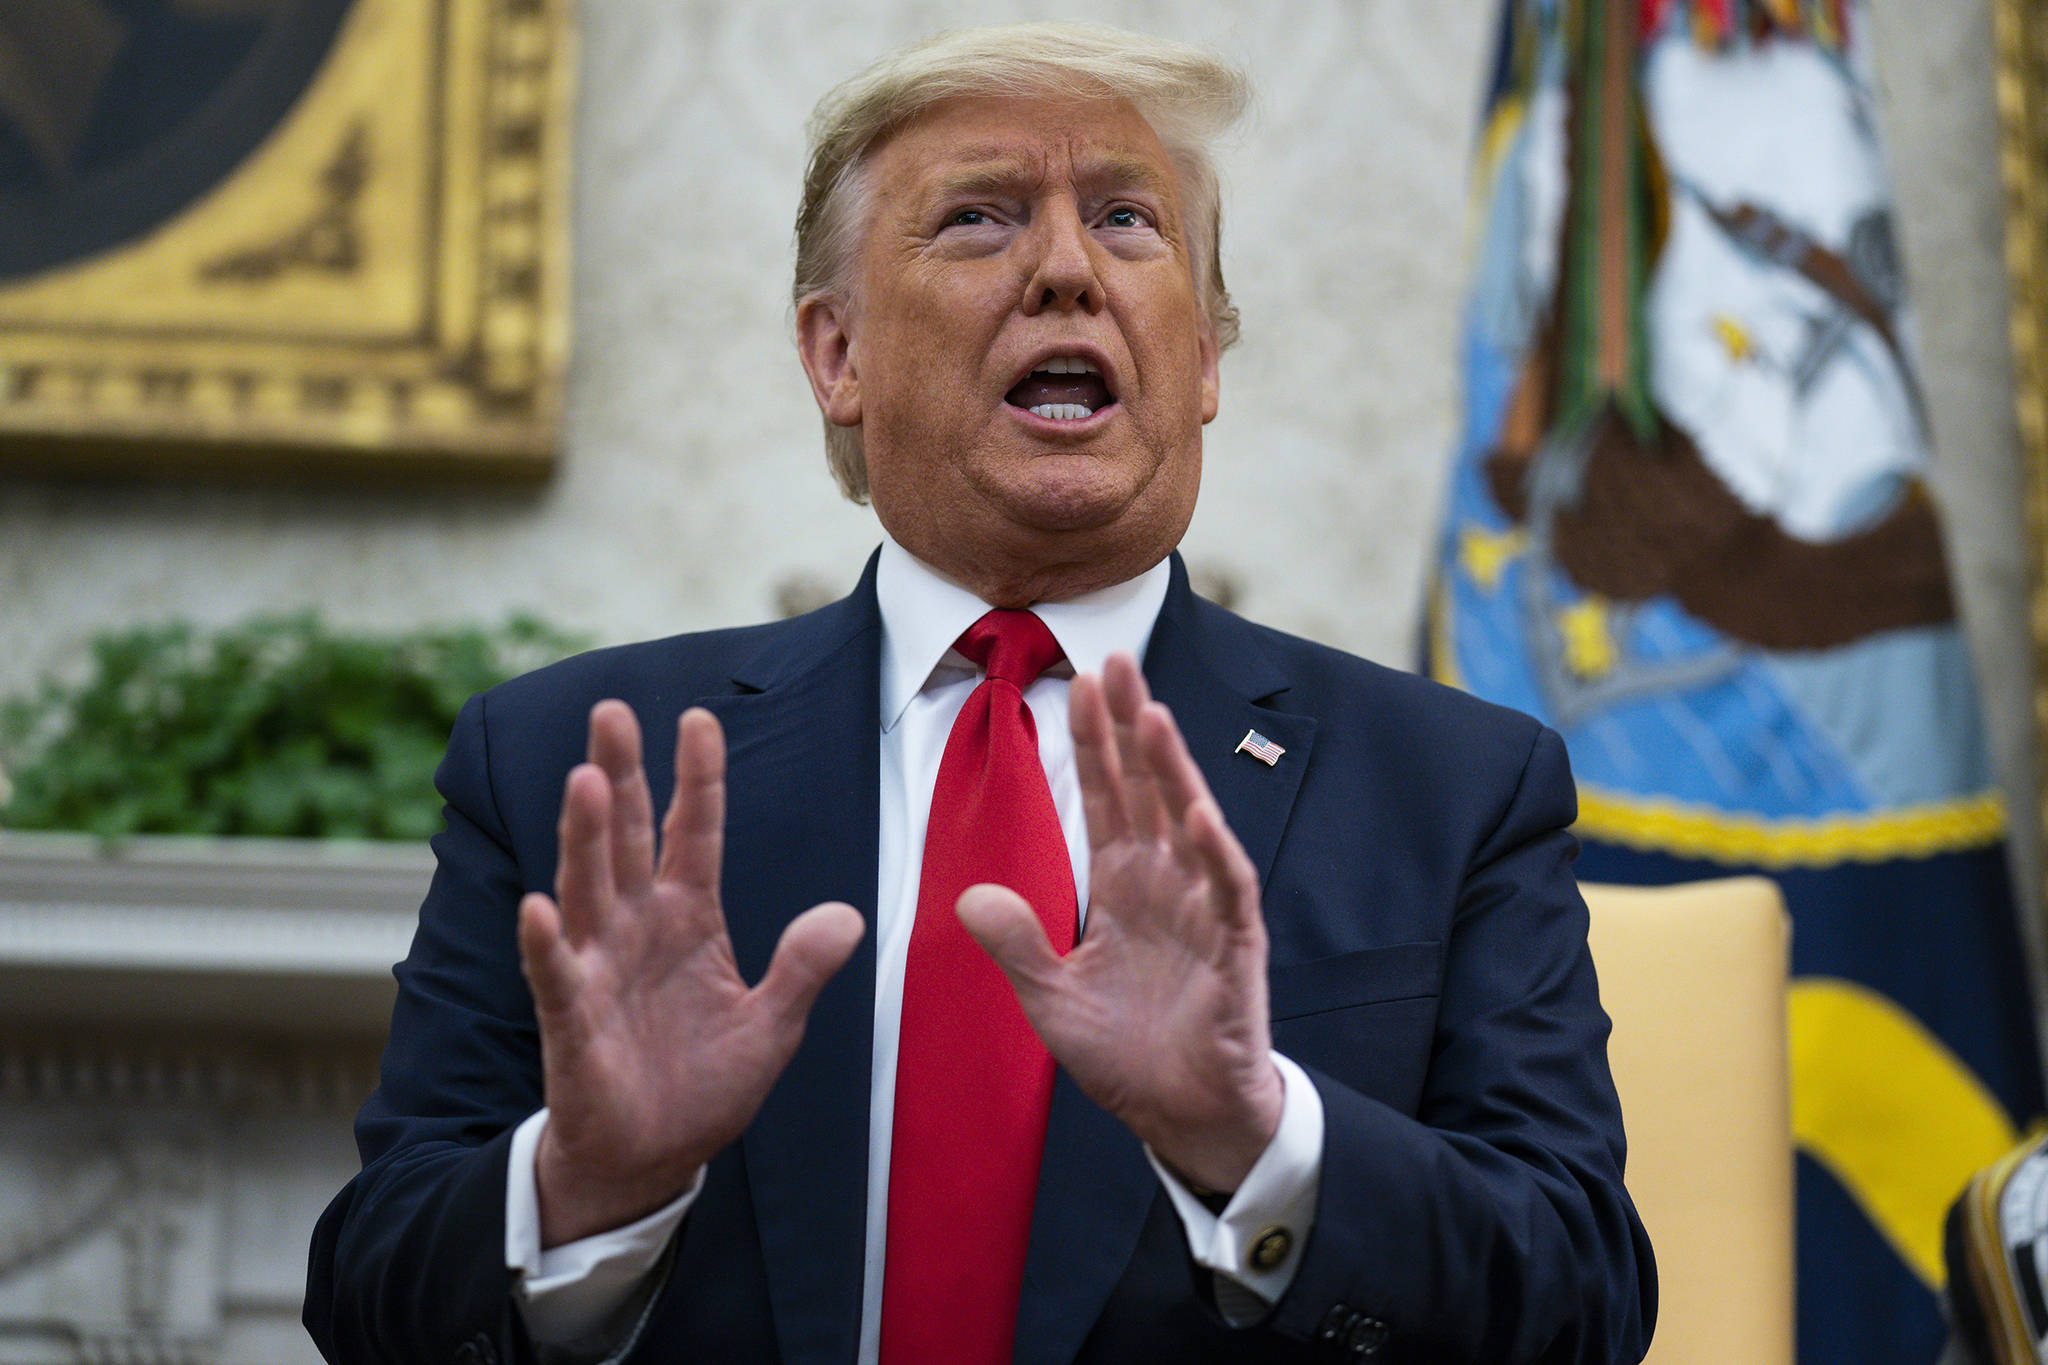 President Donald Trump speaks during a meeting with Ecuadorian President Lenin Moreno in the Oval Office of the White House, Wednesday in Washington. (AP Photo | Evan Vucci)